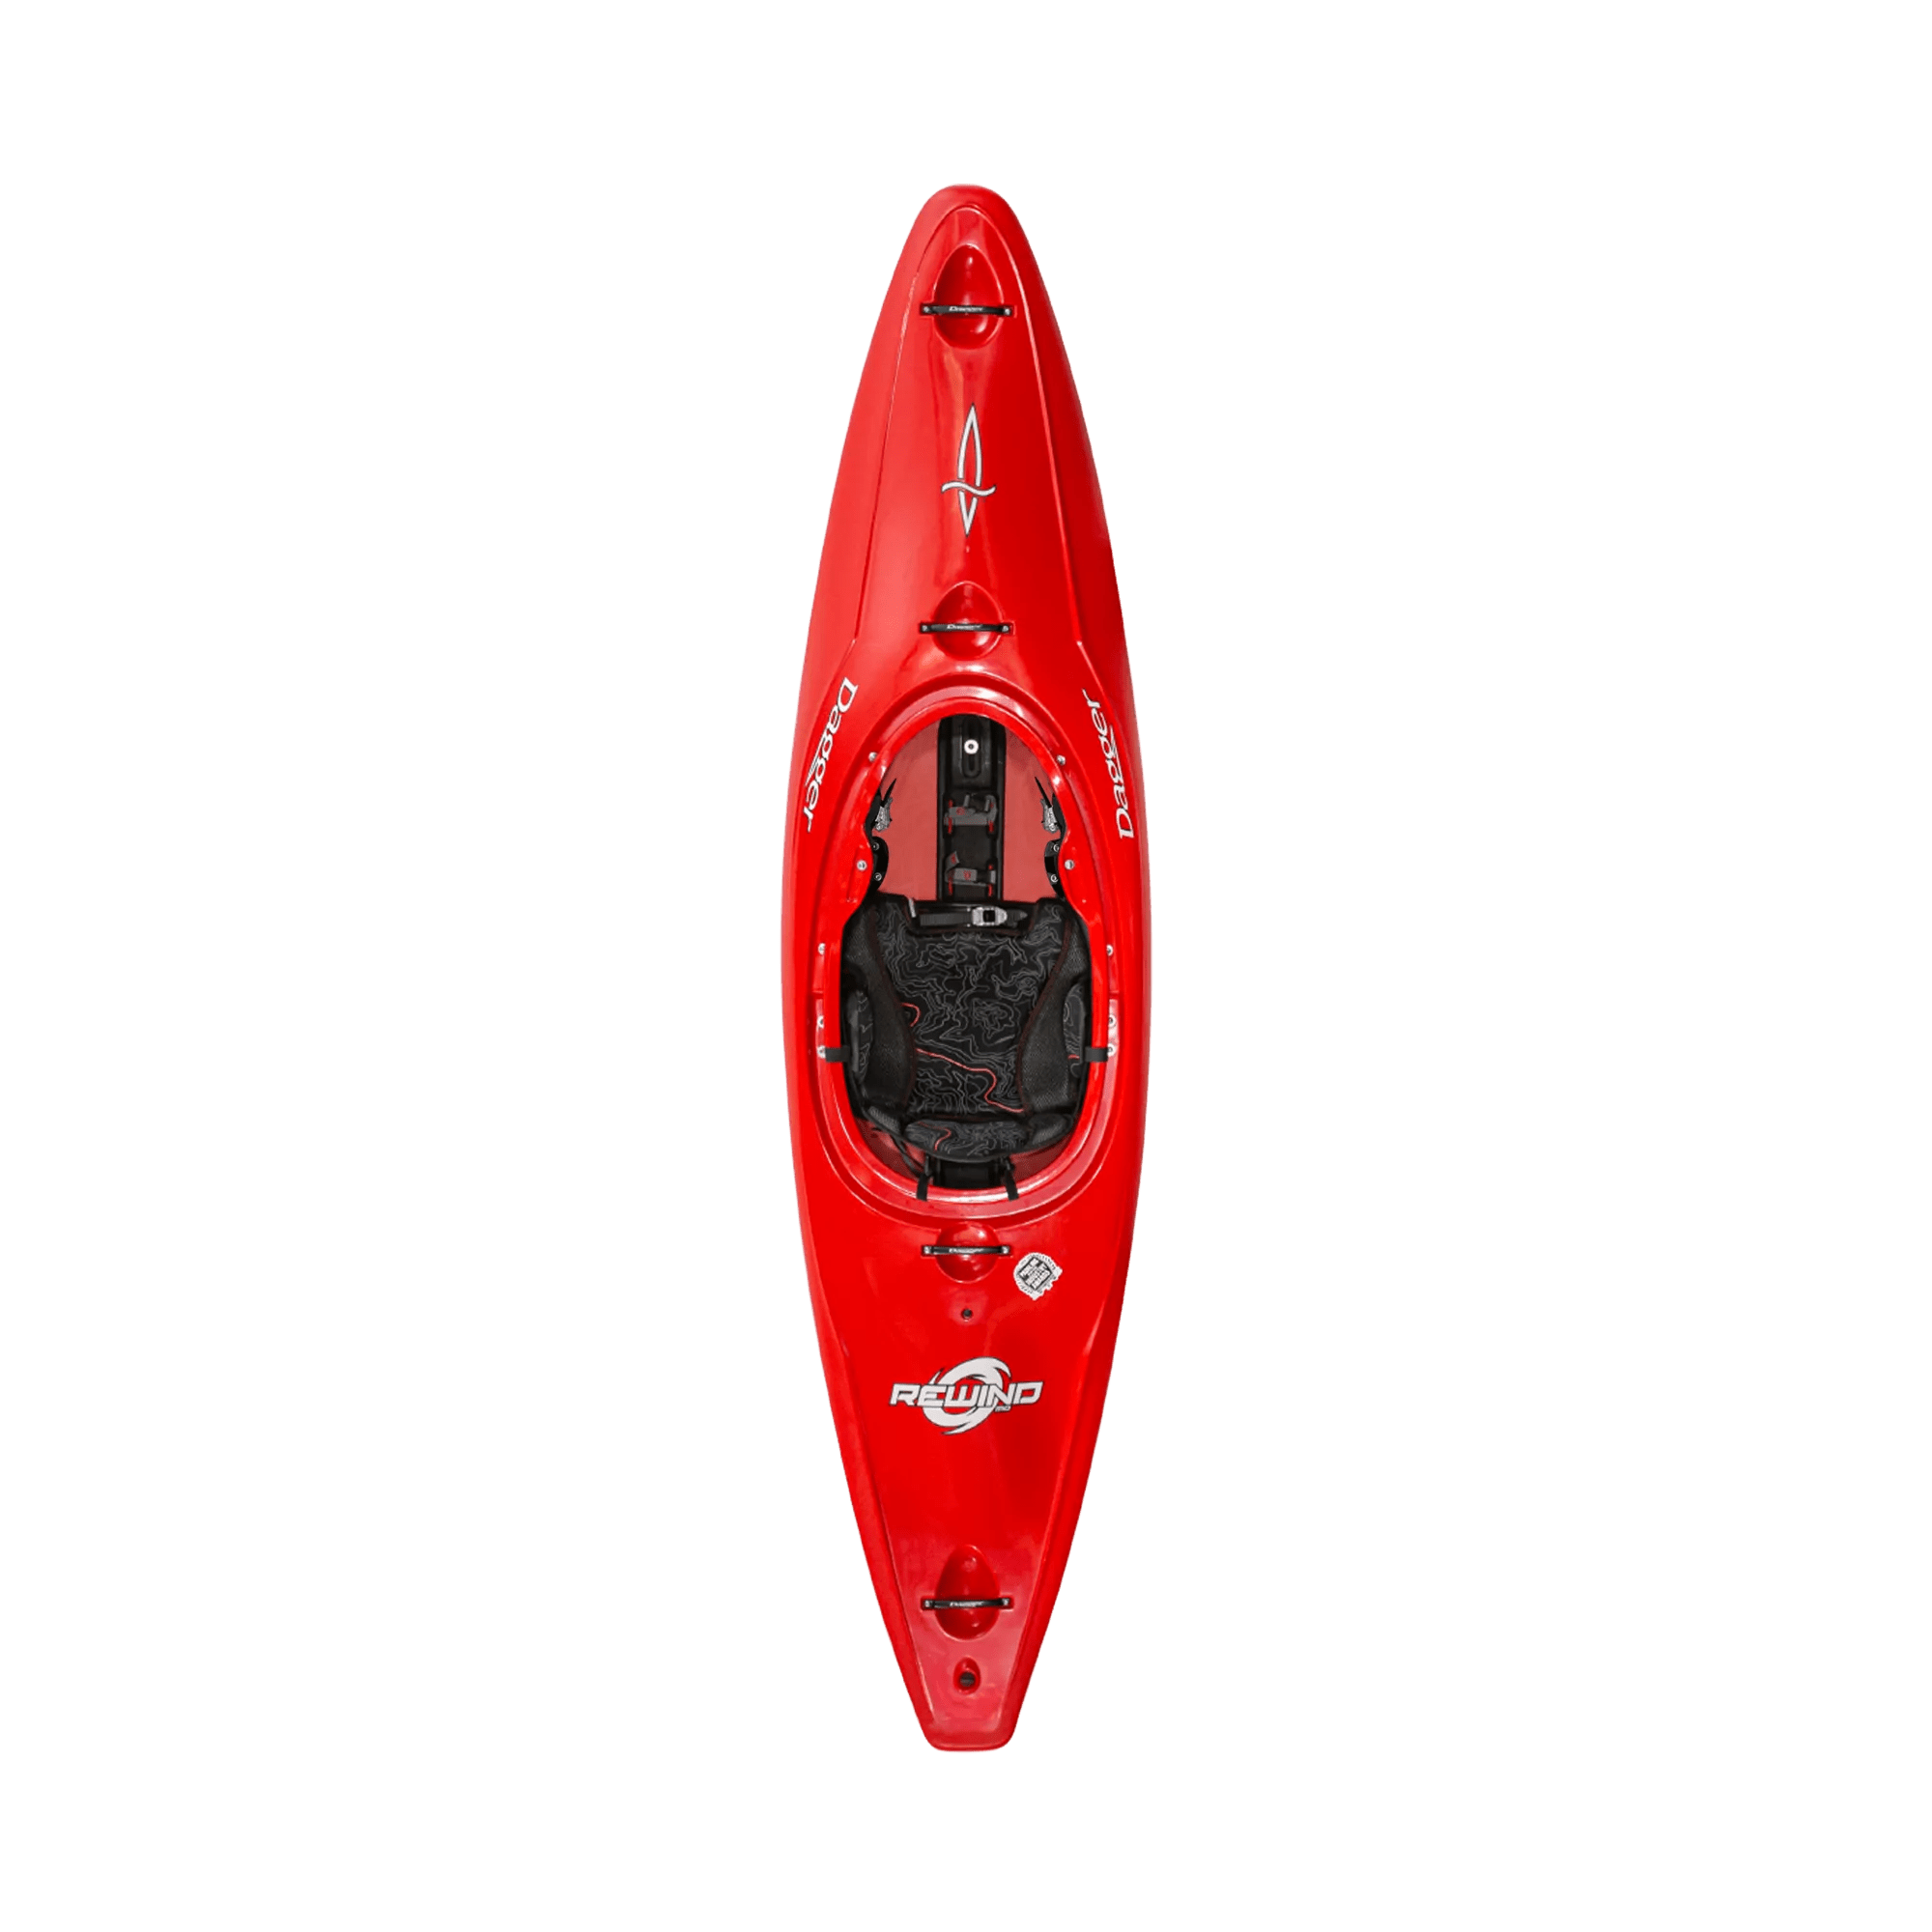 DAGGER - Rewind L River Play Whitewater Kayak - Red - 9010484057 - TOP